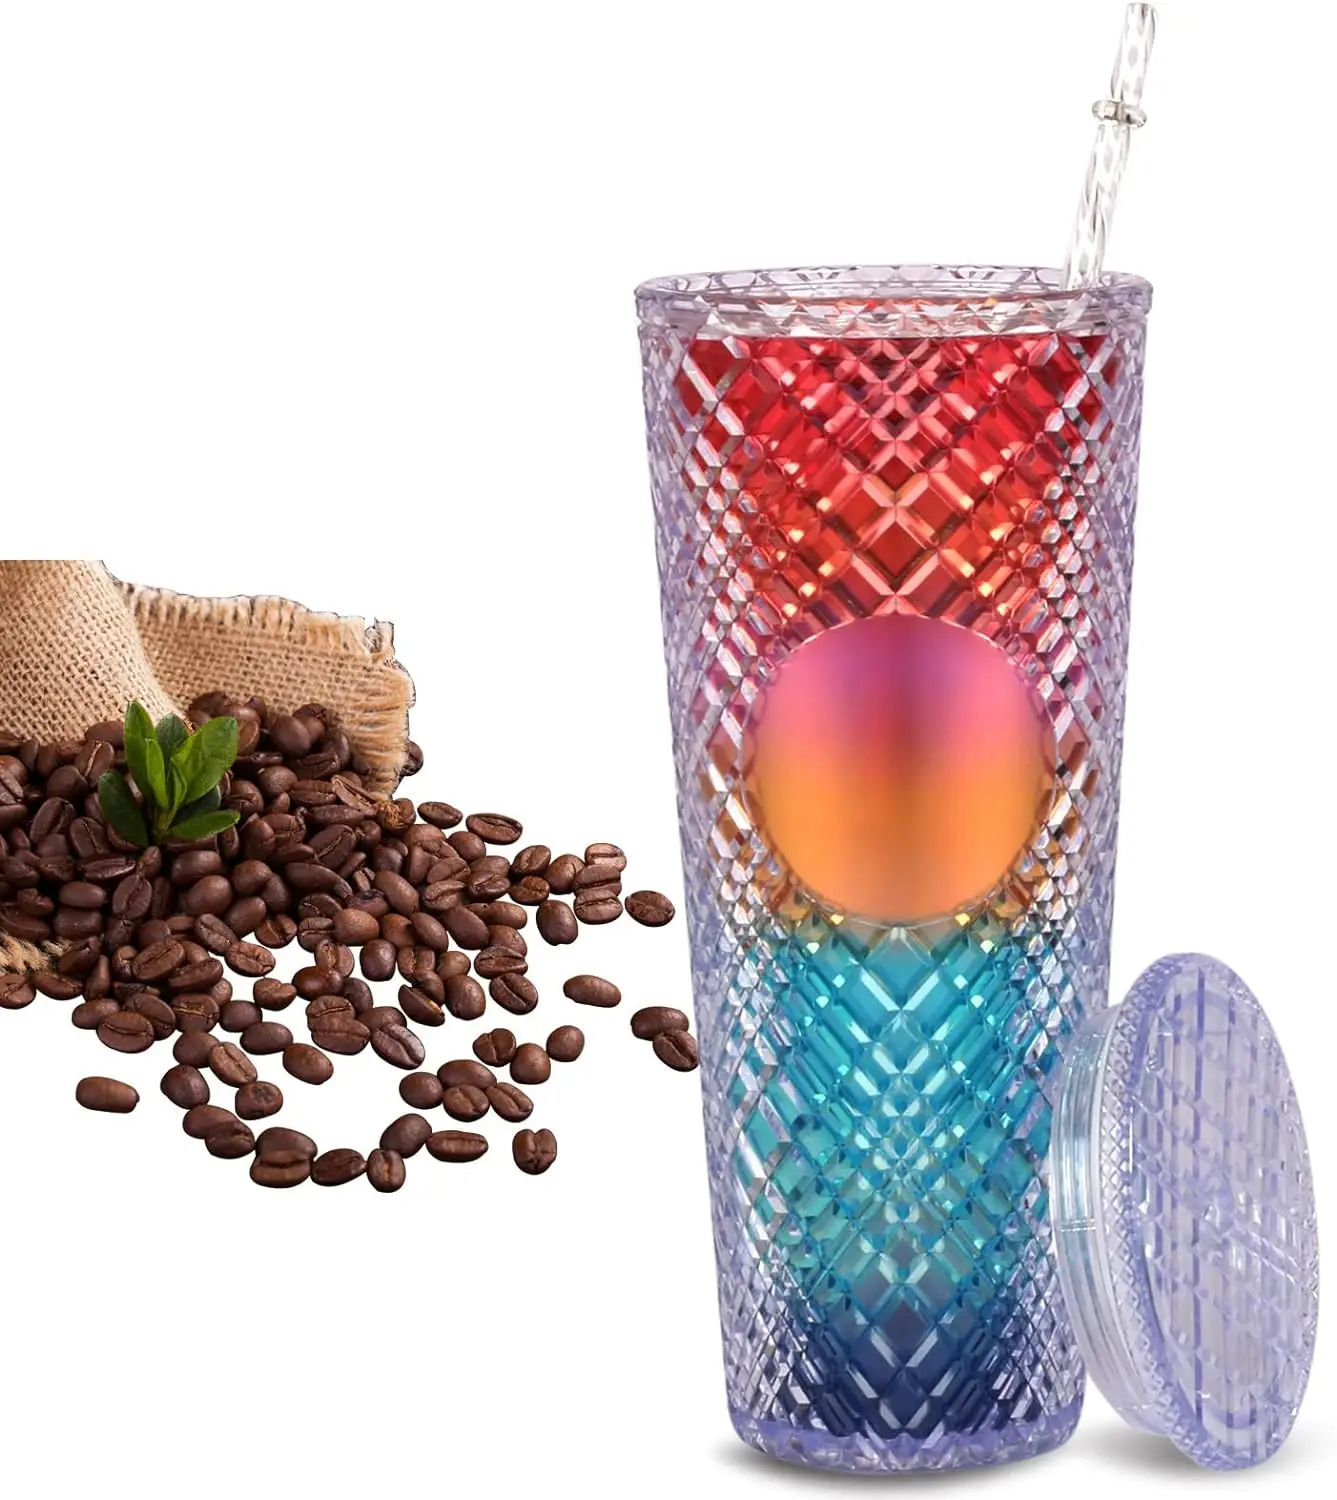 24 oz BPA Free Plastic Jeweled Double Wall Insulated Tumbler Coffee Cup Travel Mug with Lids and Straws Vulcanus